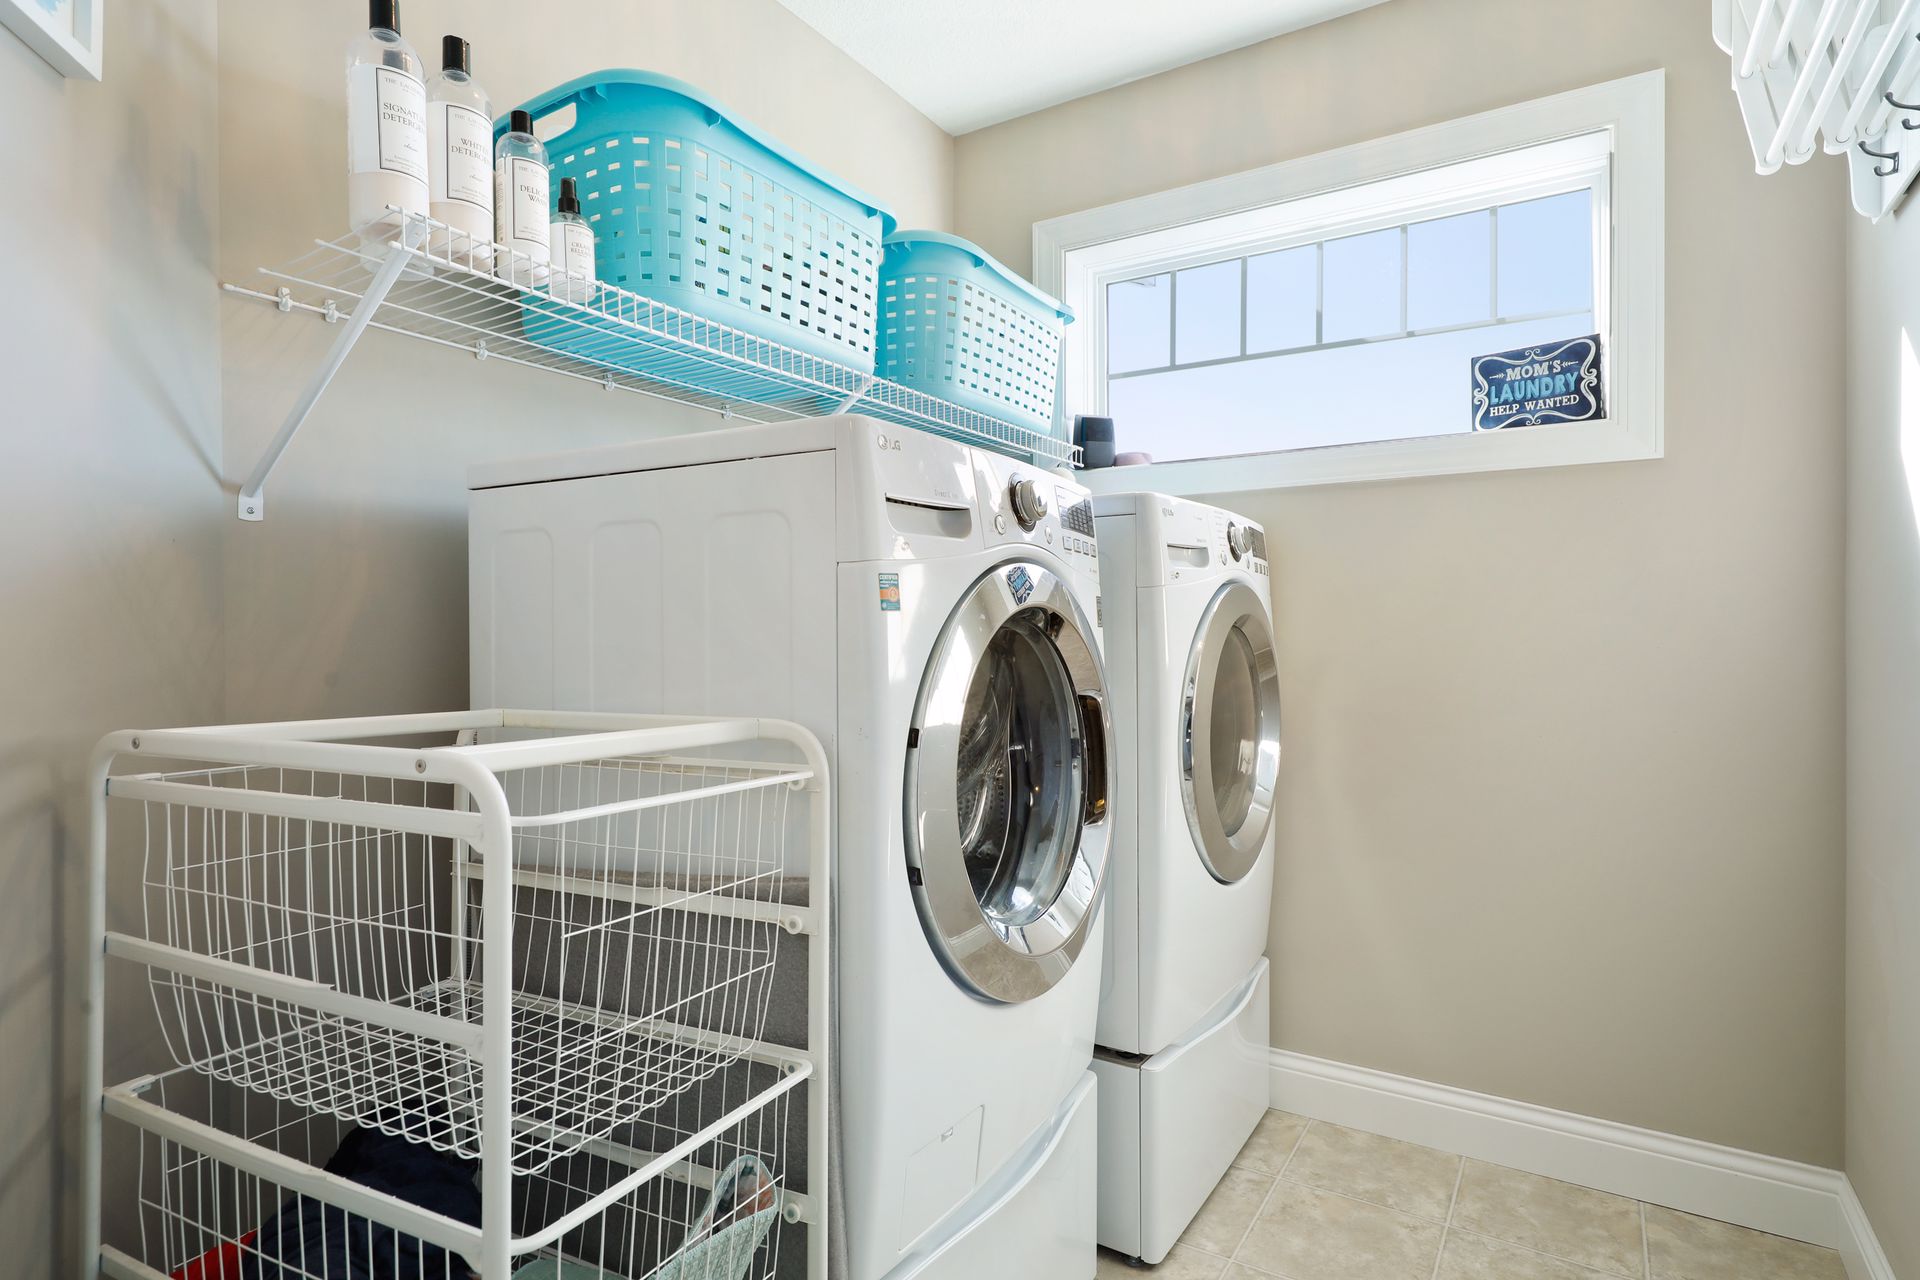 Lake Elmo Home for sale laundry room